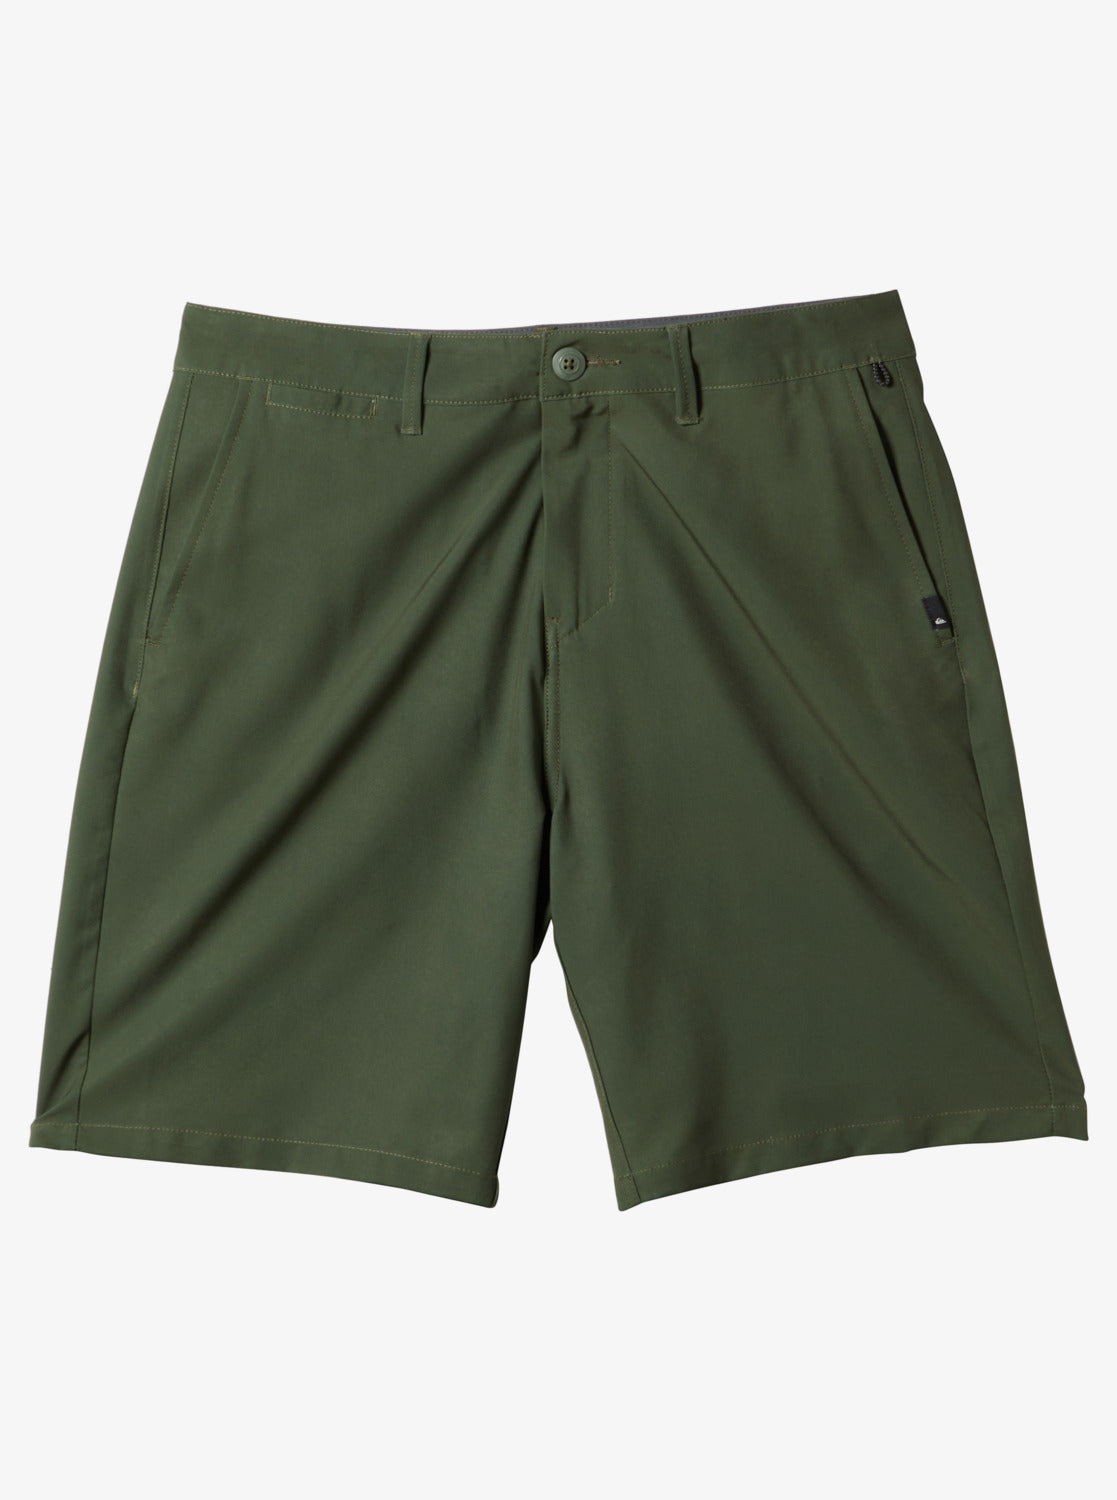 Quiksilver Ocean Union Amphibian 20" Shorts in climbing ivy colourway from front